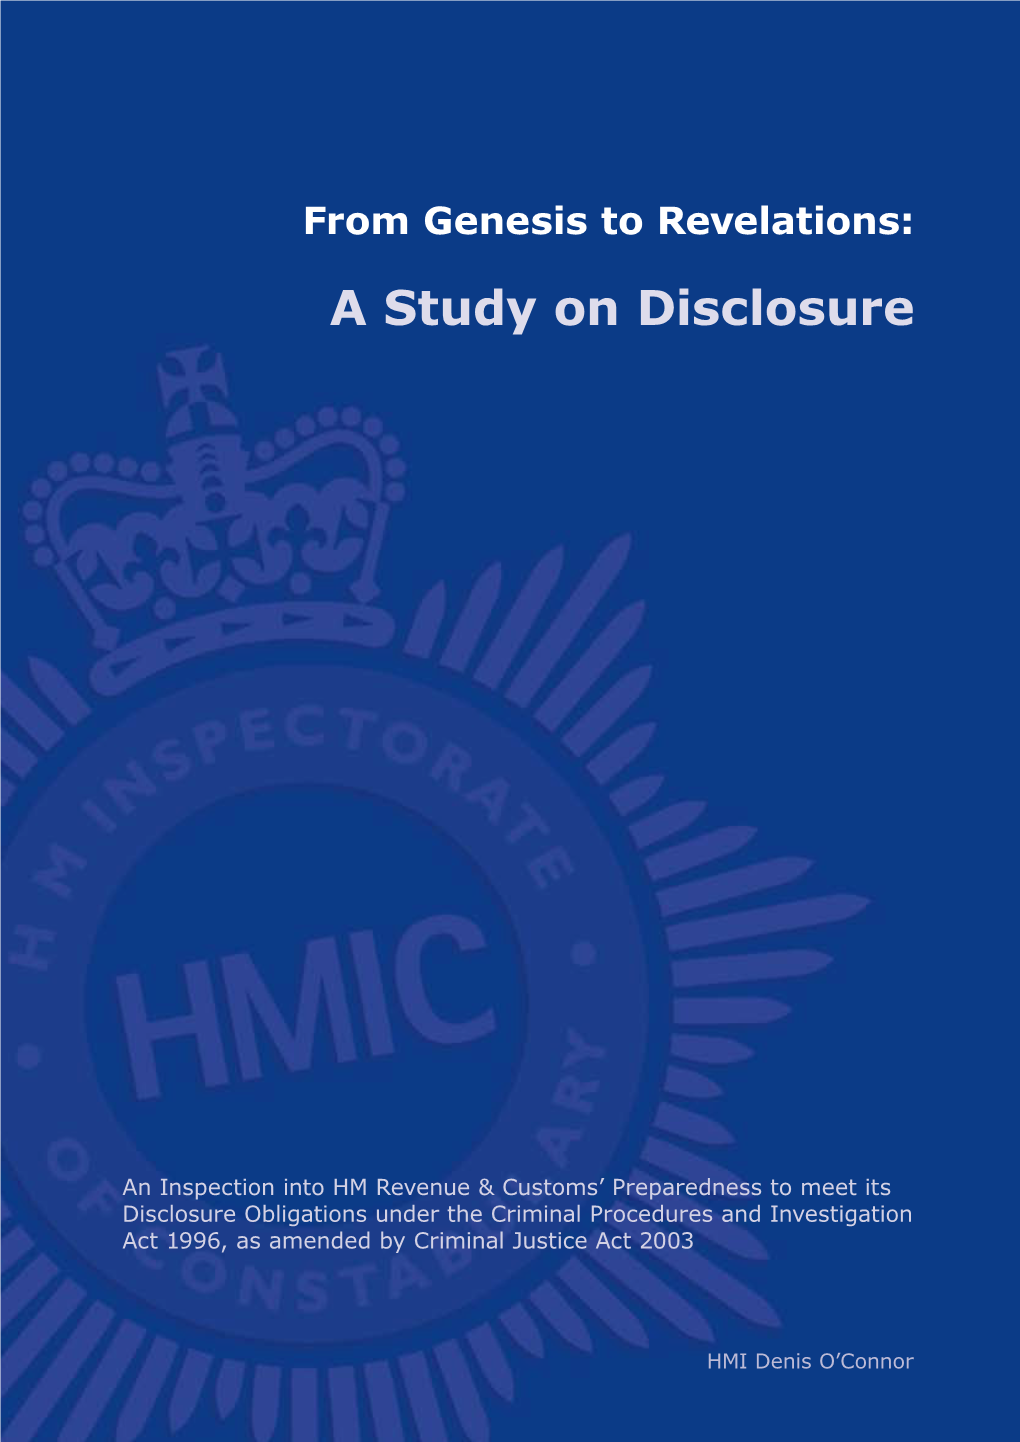 HMRC Inspection: from Genesis to Revelations – a Study on Disclosure